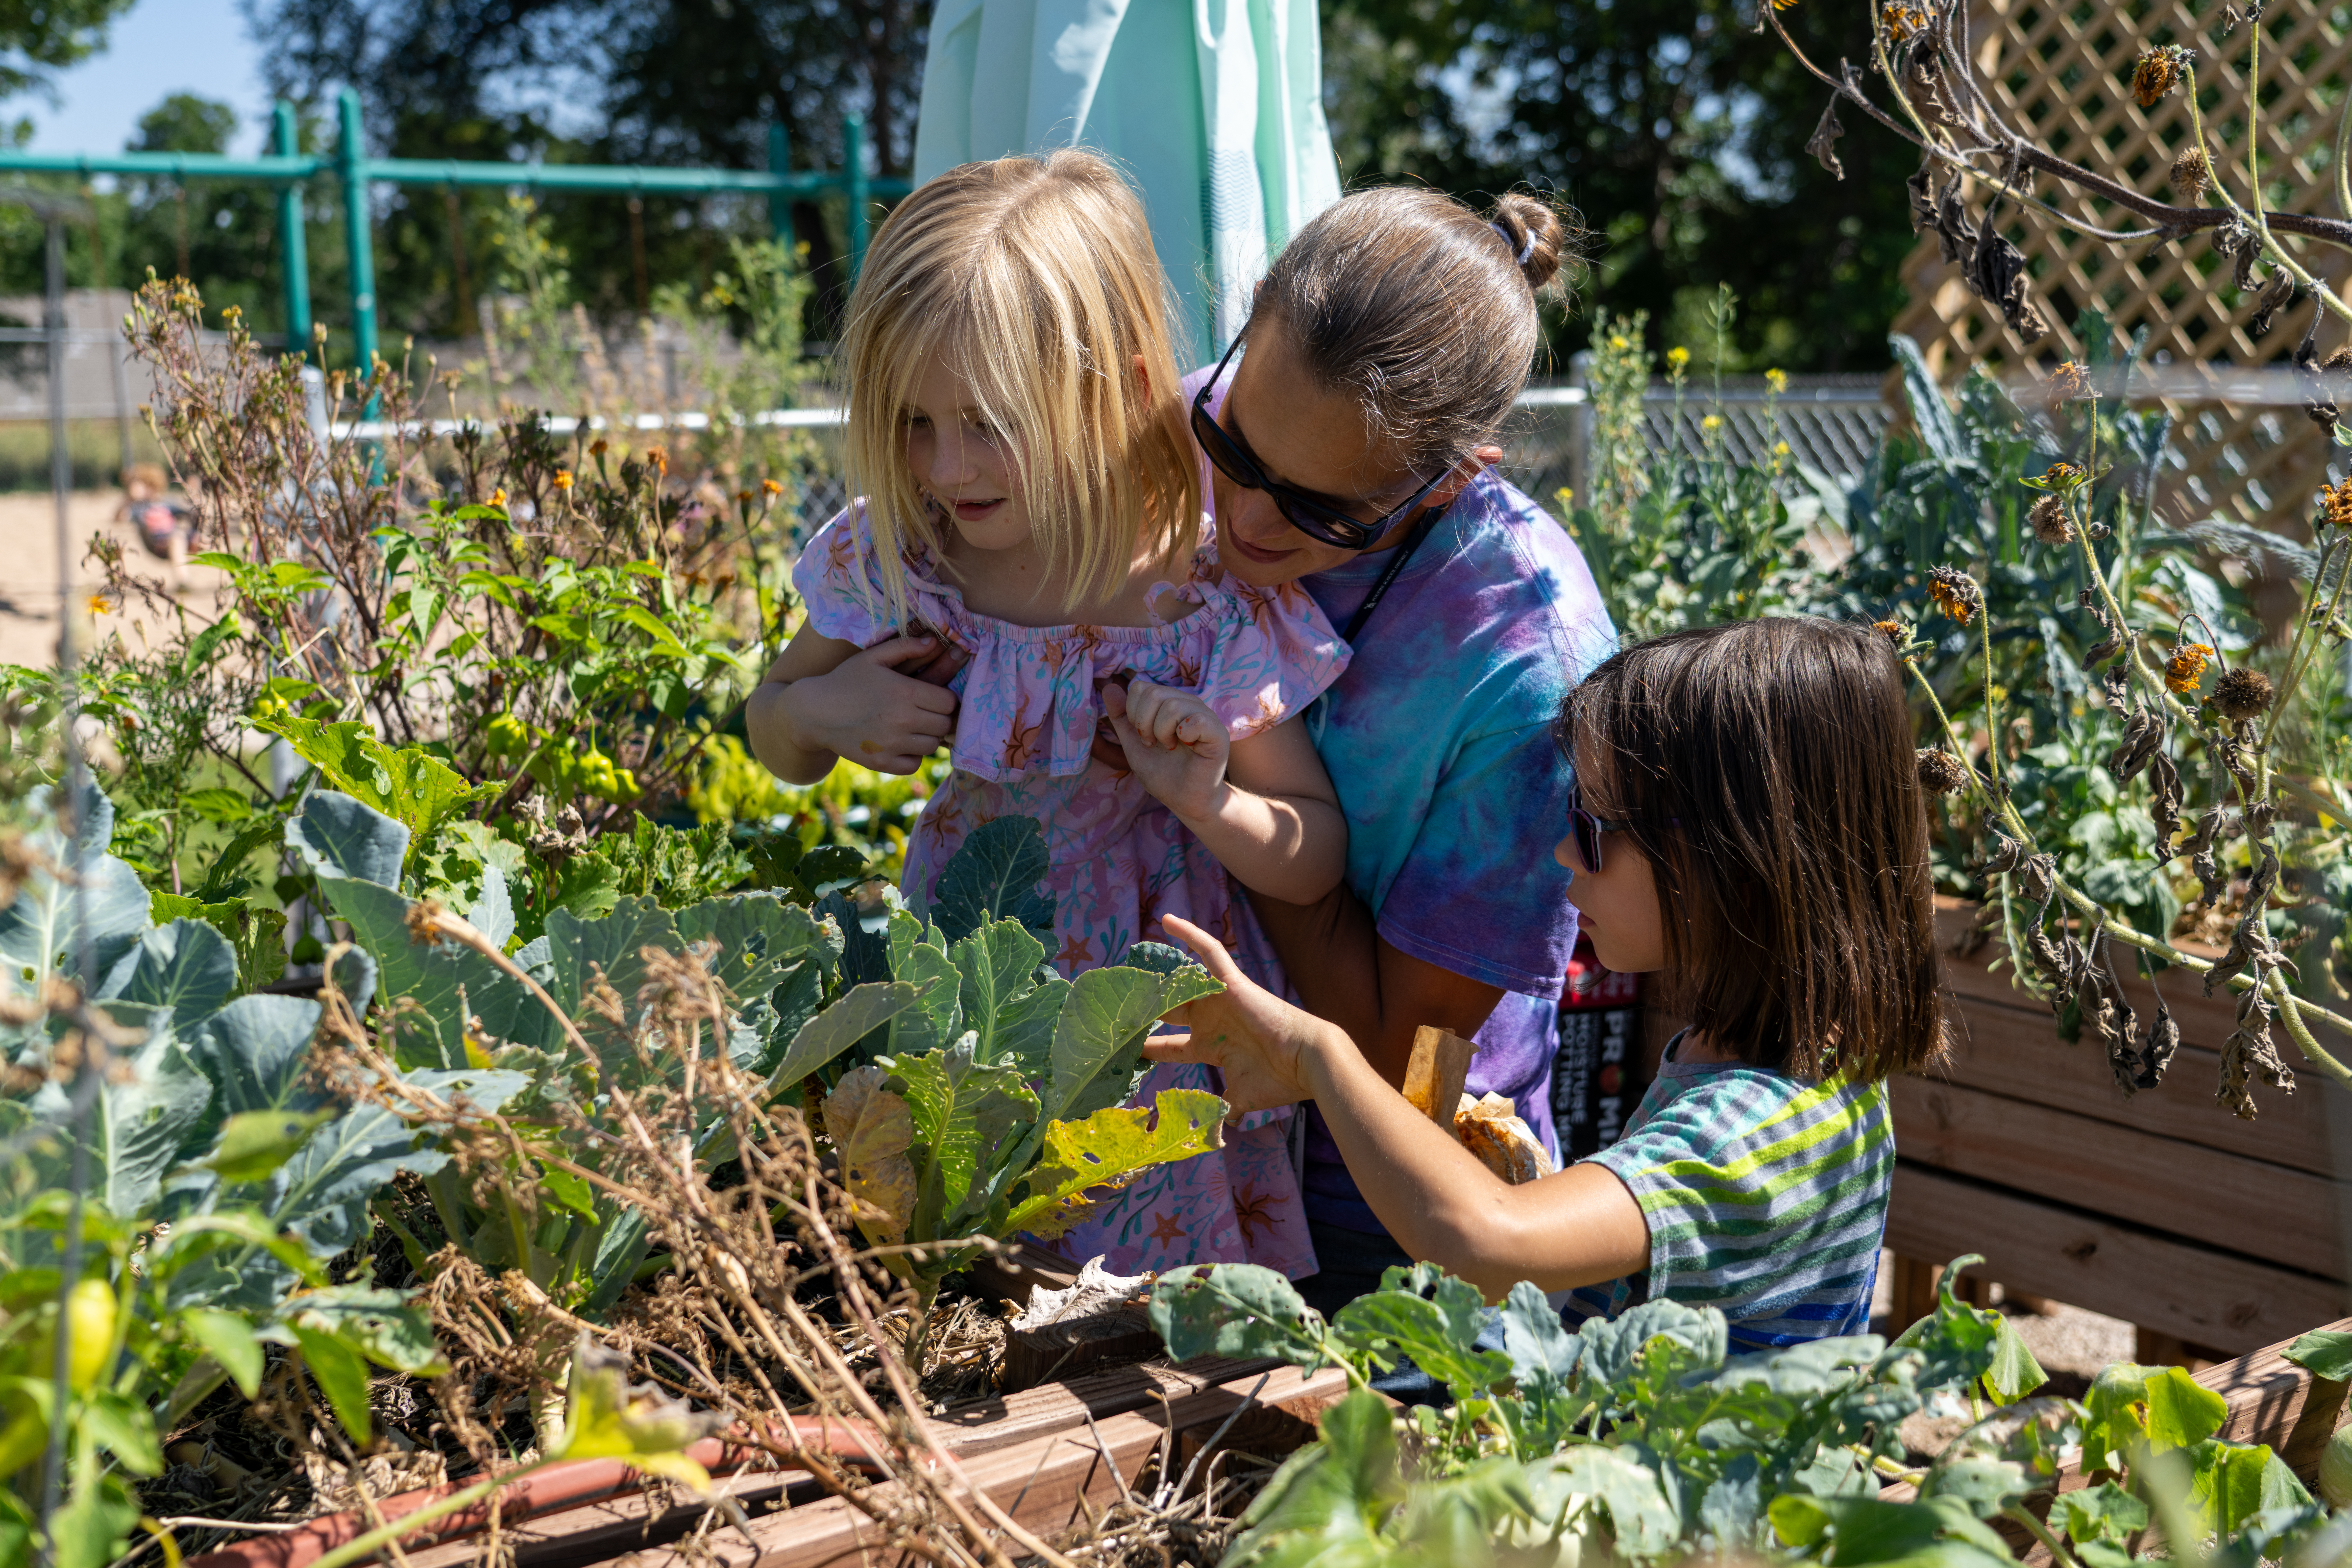 Younger students enjoy the garden.